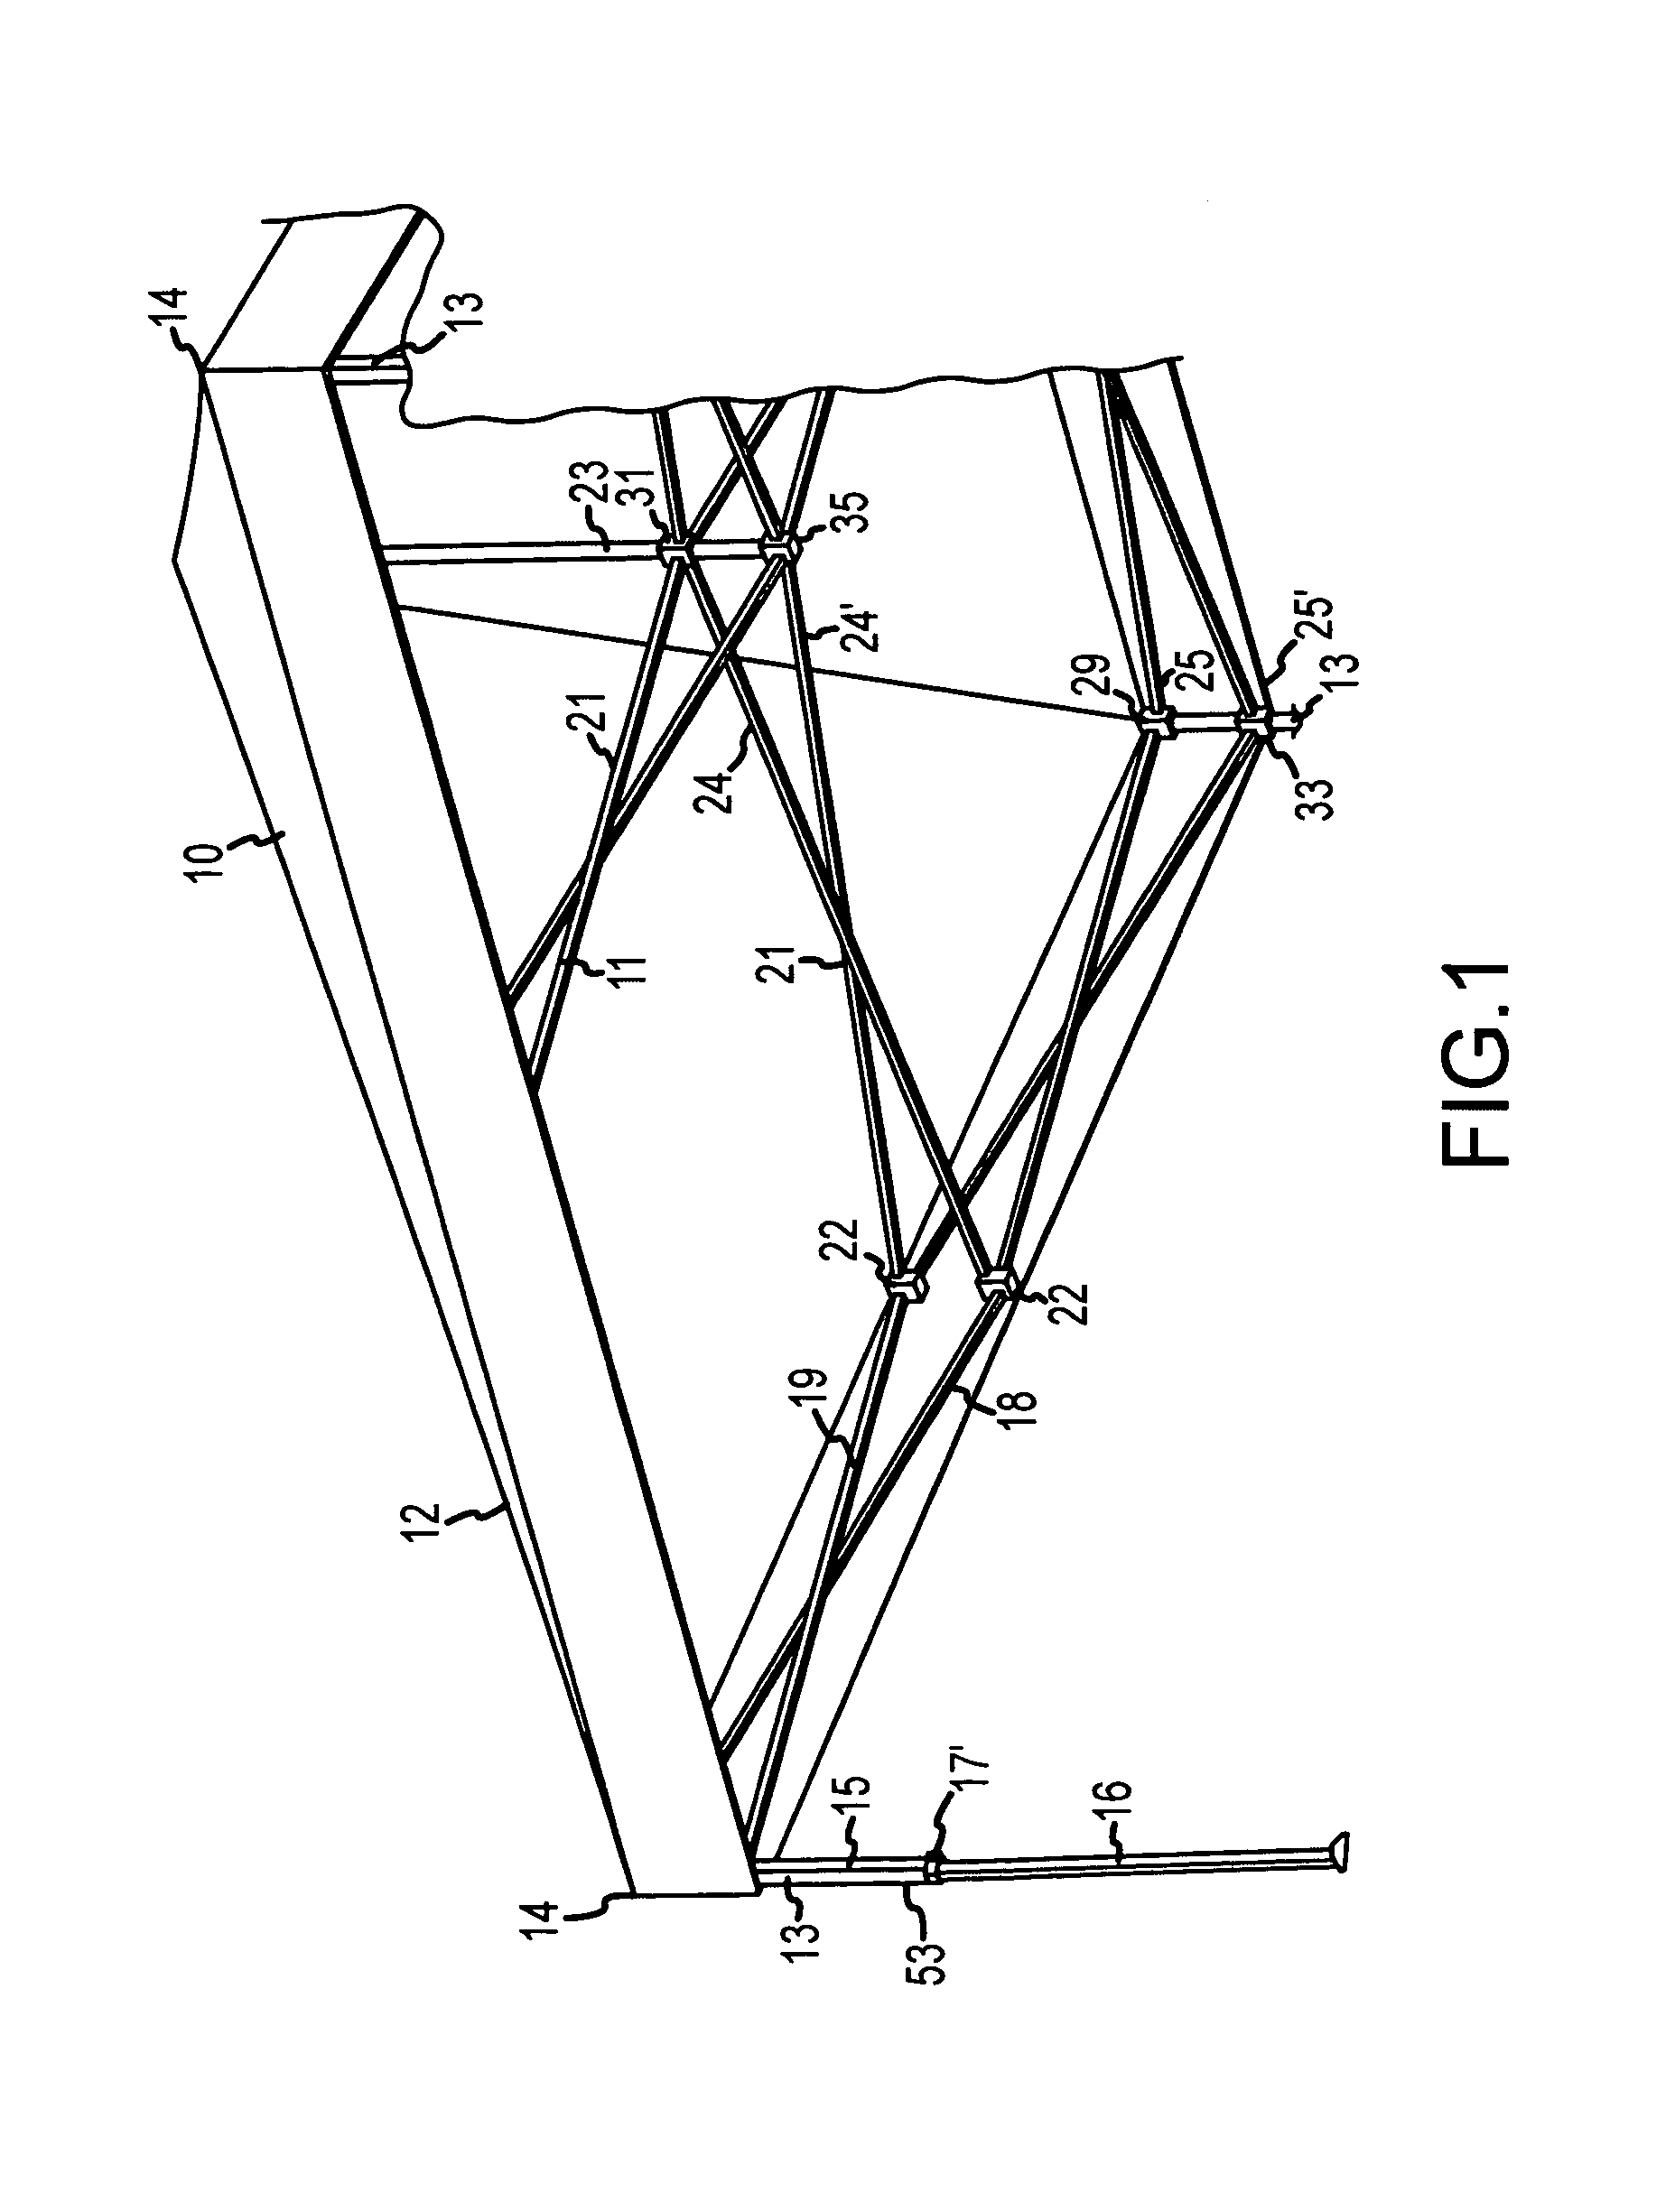 Corner molding and stop assembly for collapsible shelter